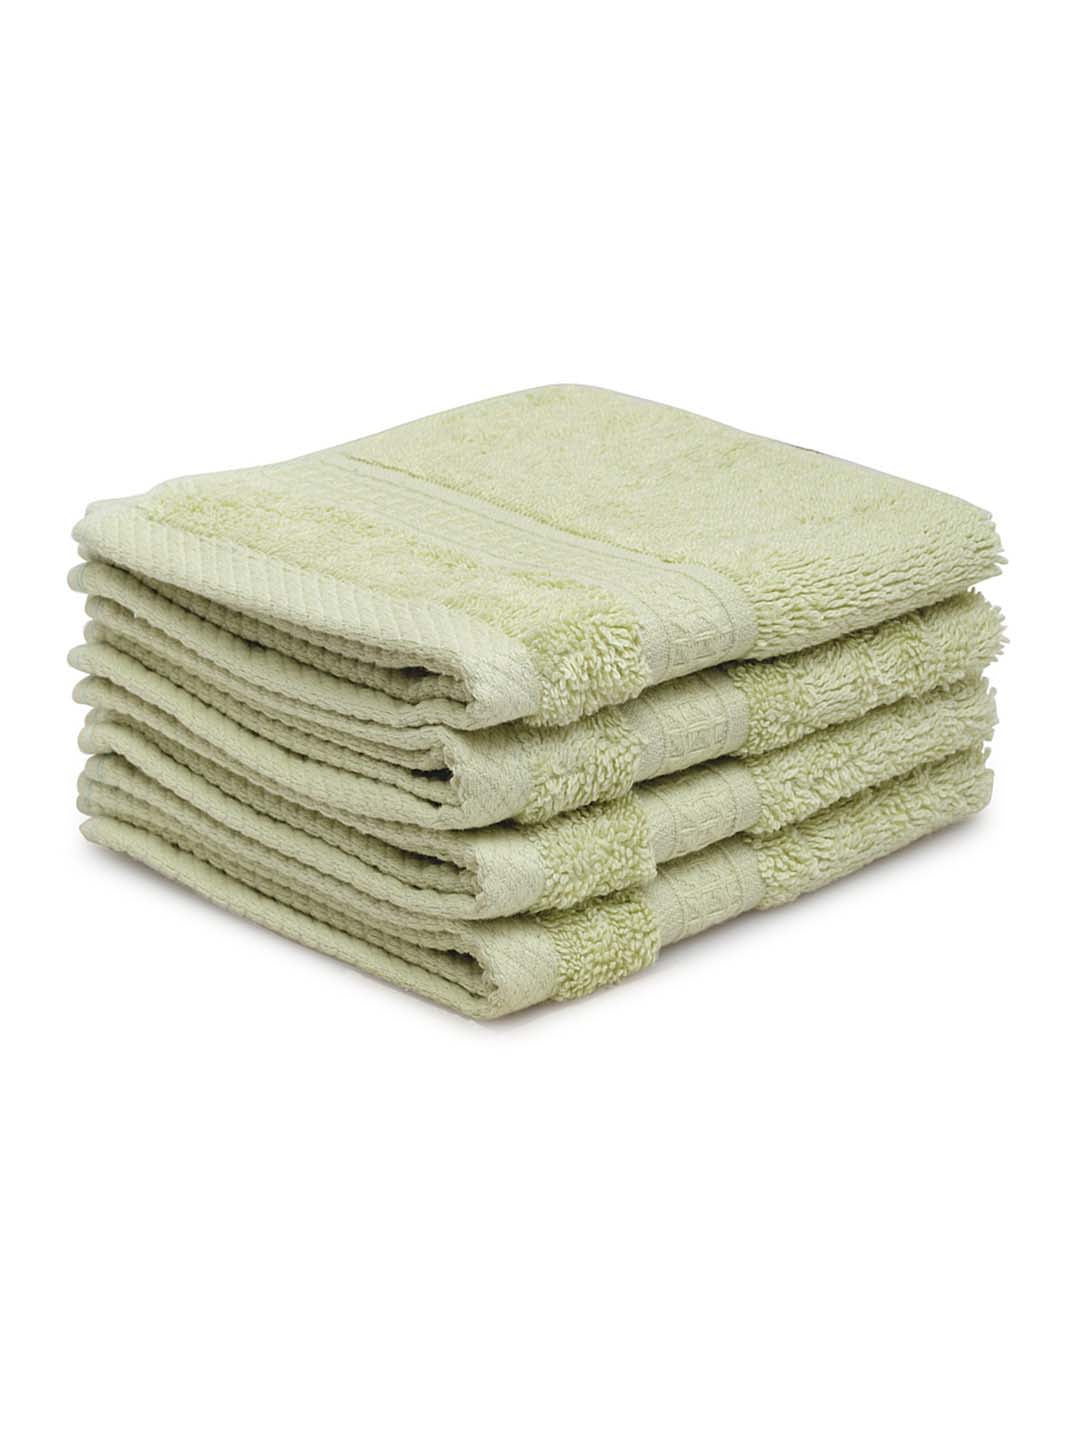 Spaces Organic 4 Pieces Face Towels (Green)